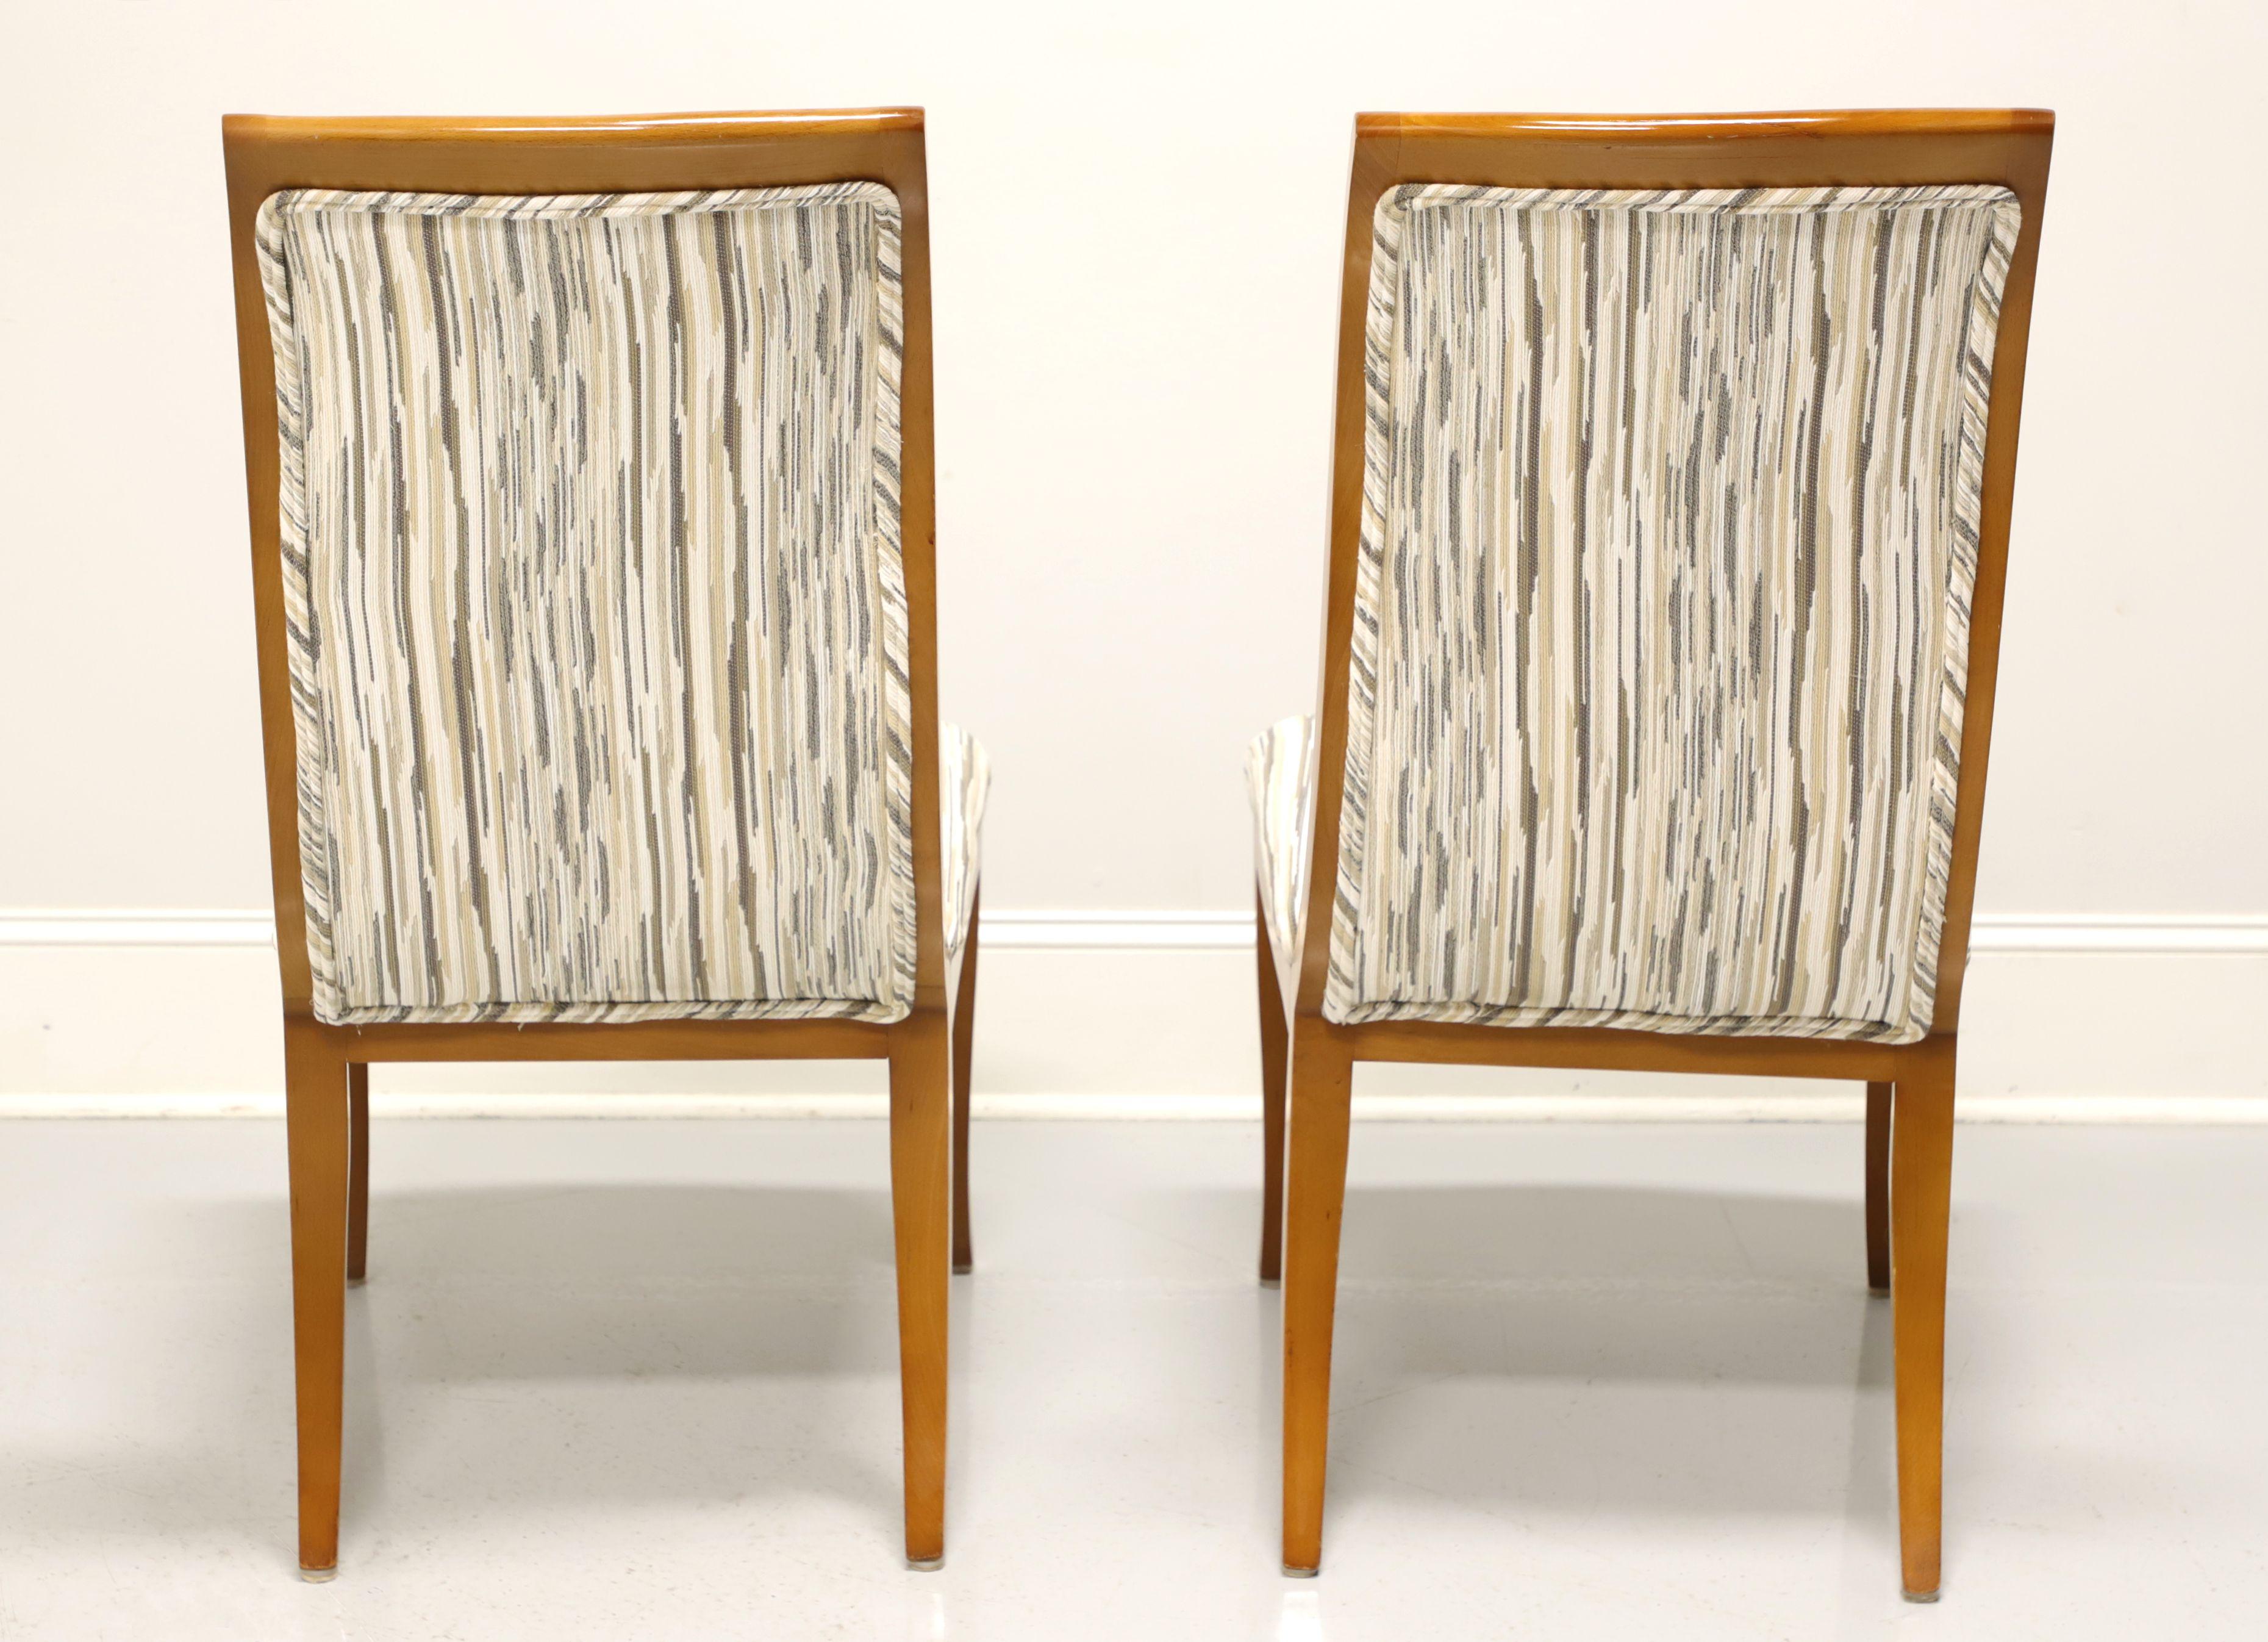 MASTERCRAFT by Baker Contemporary Dining Side Chairs - Pair In Good Condition For Sale In Charlotte, NC